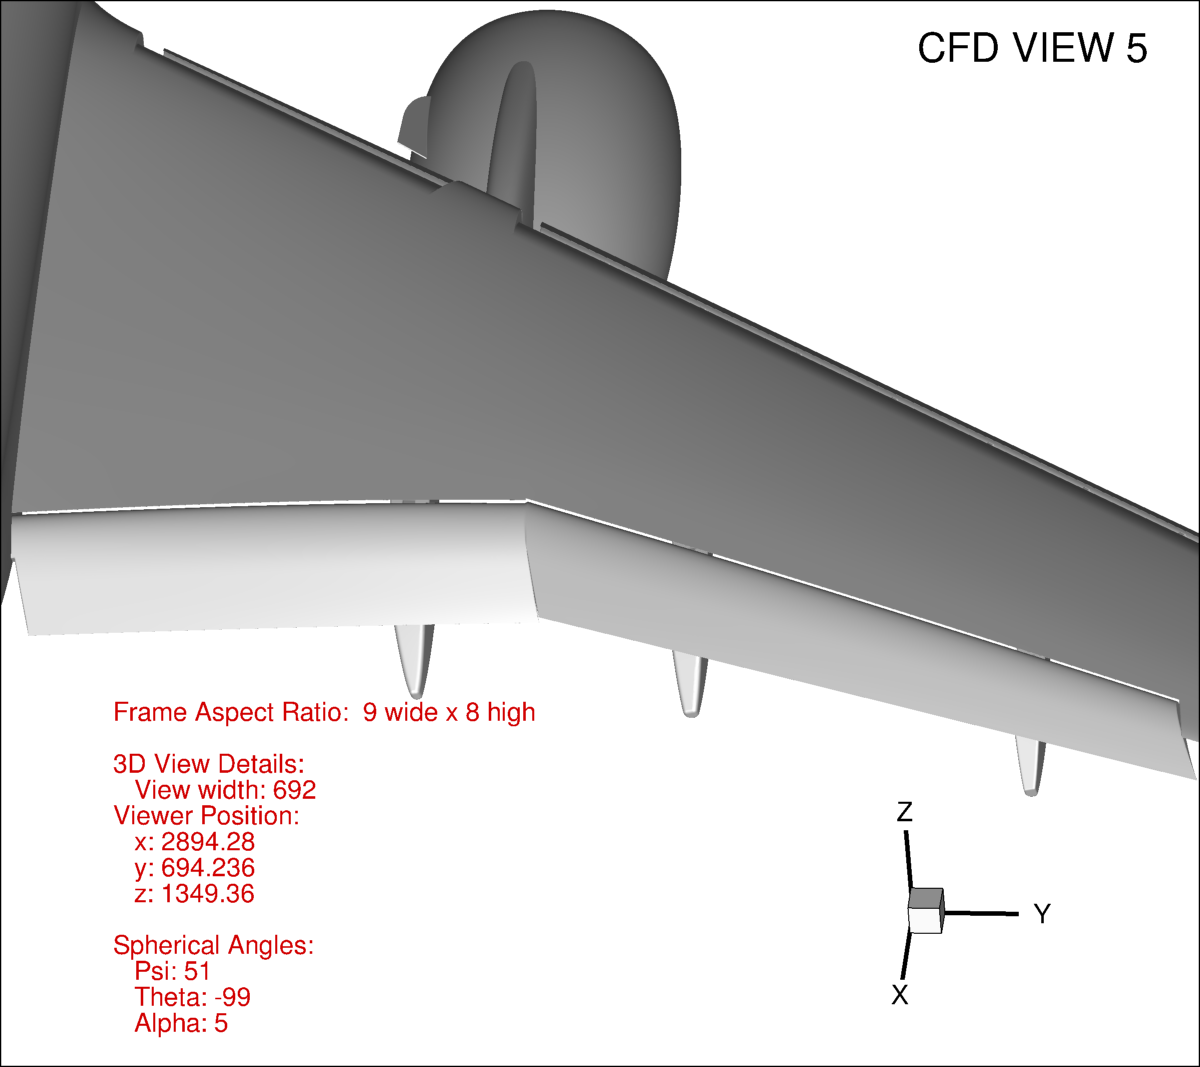 Example CFD view #5